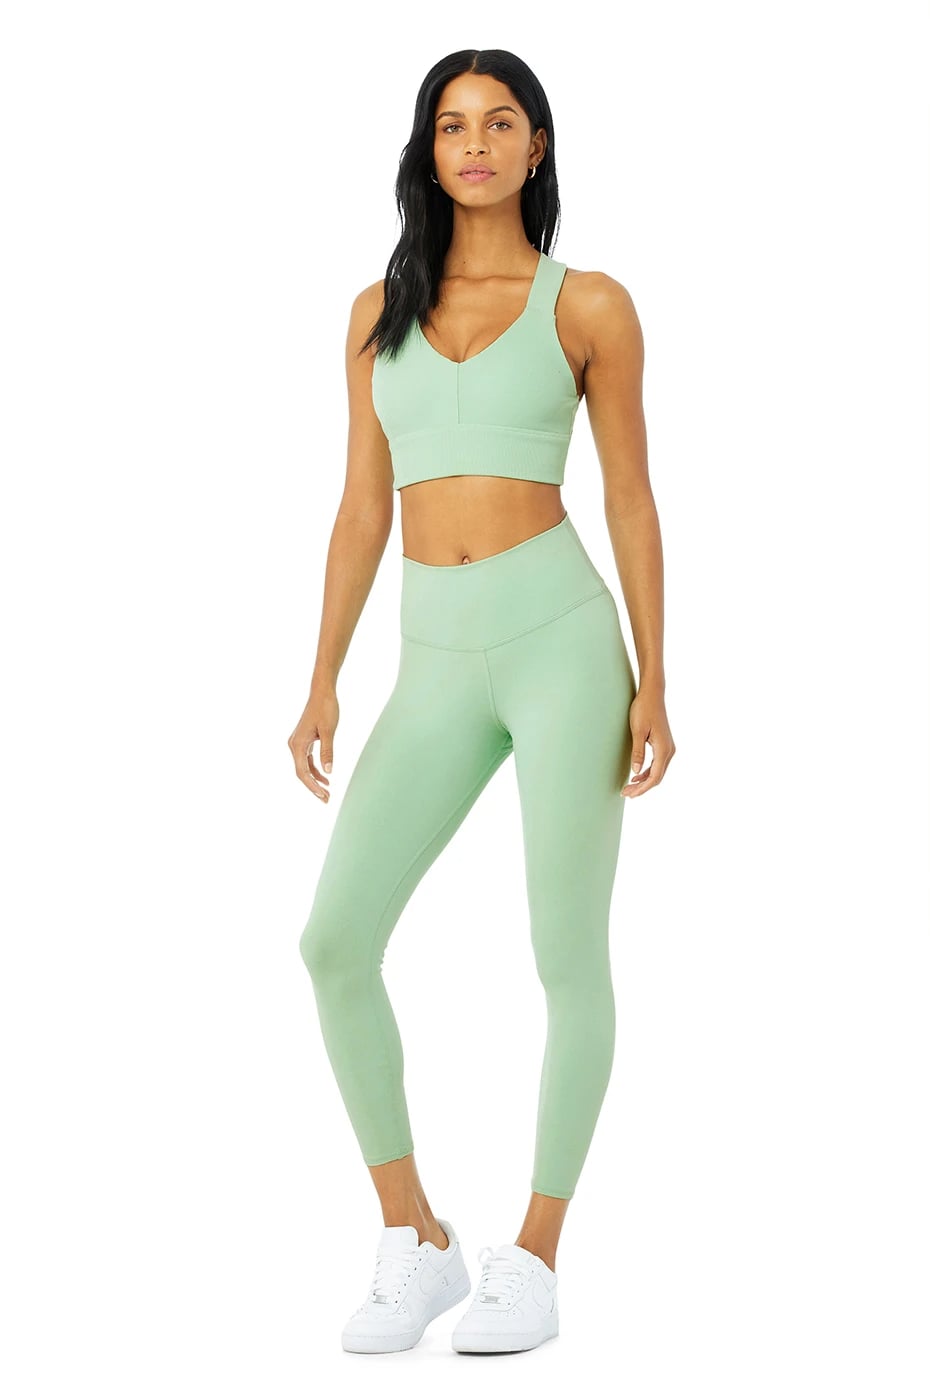 Workout Clothes: Stylish Activewear to Wear to the Gym 2021